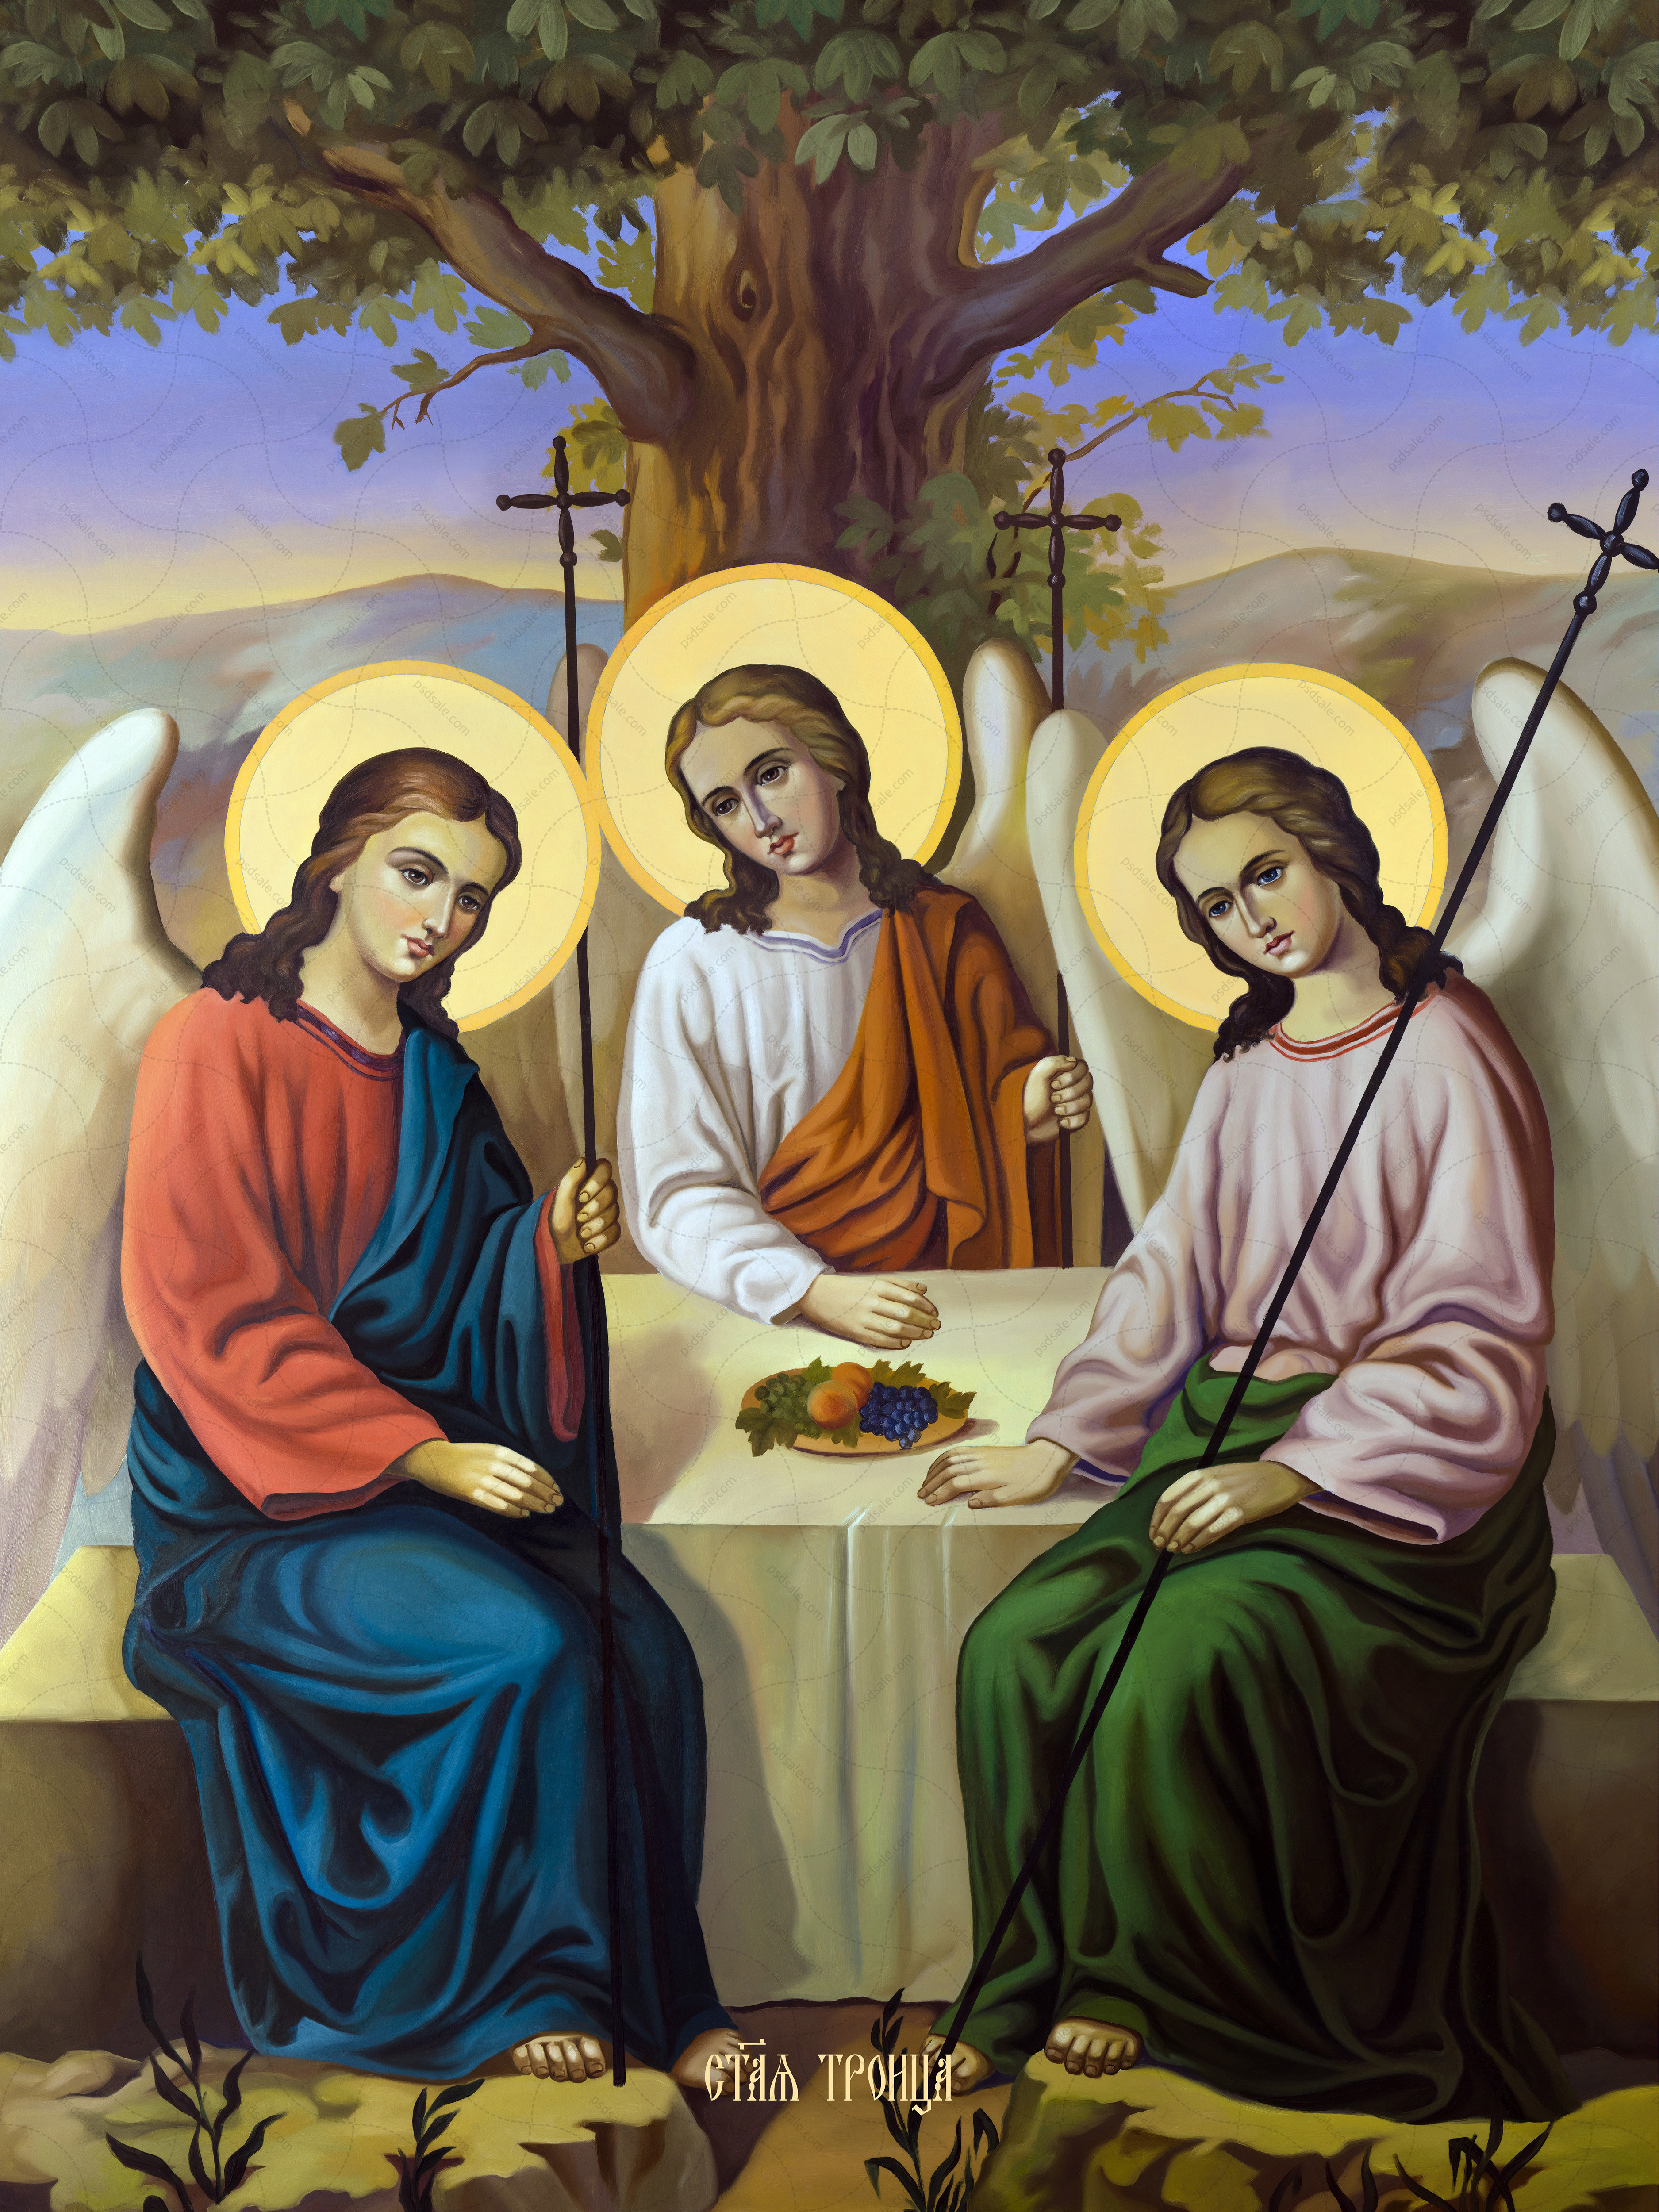 Buy the image of icon: Holy Trinity